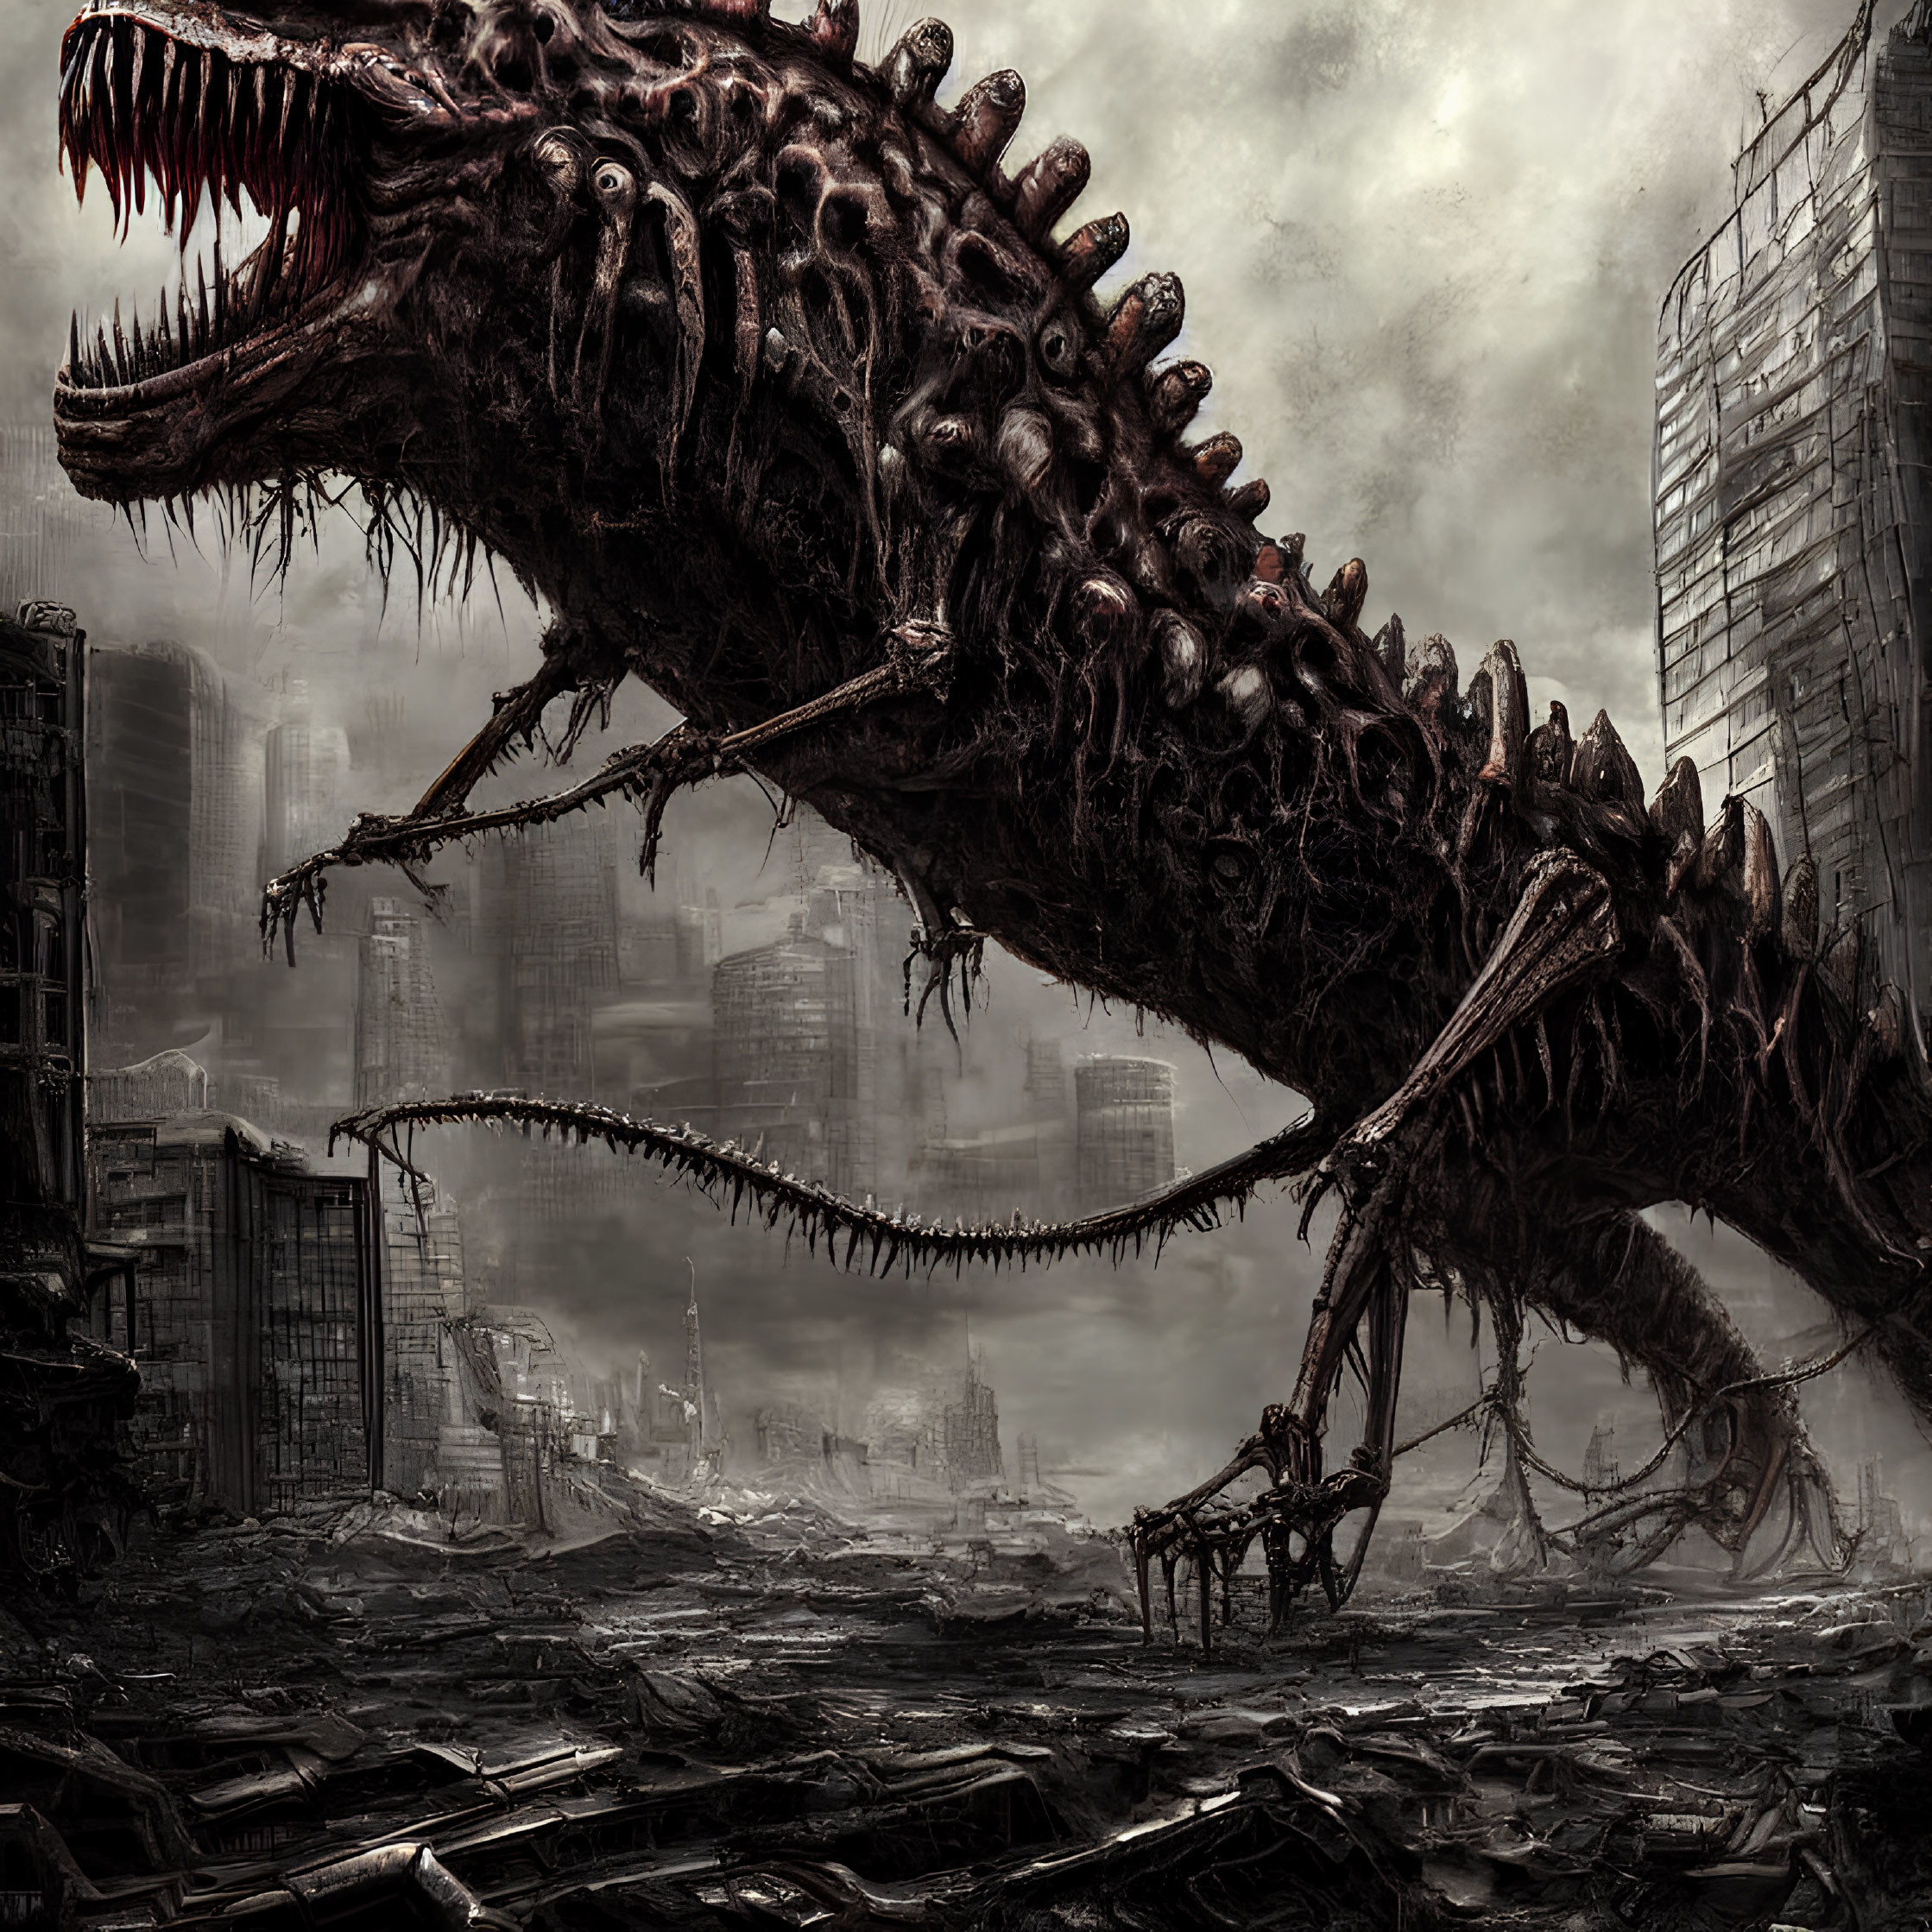 Monstrous creature with sharp teeth in post-apocalyptic cityscape